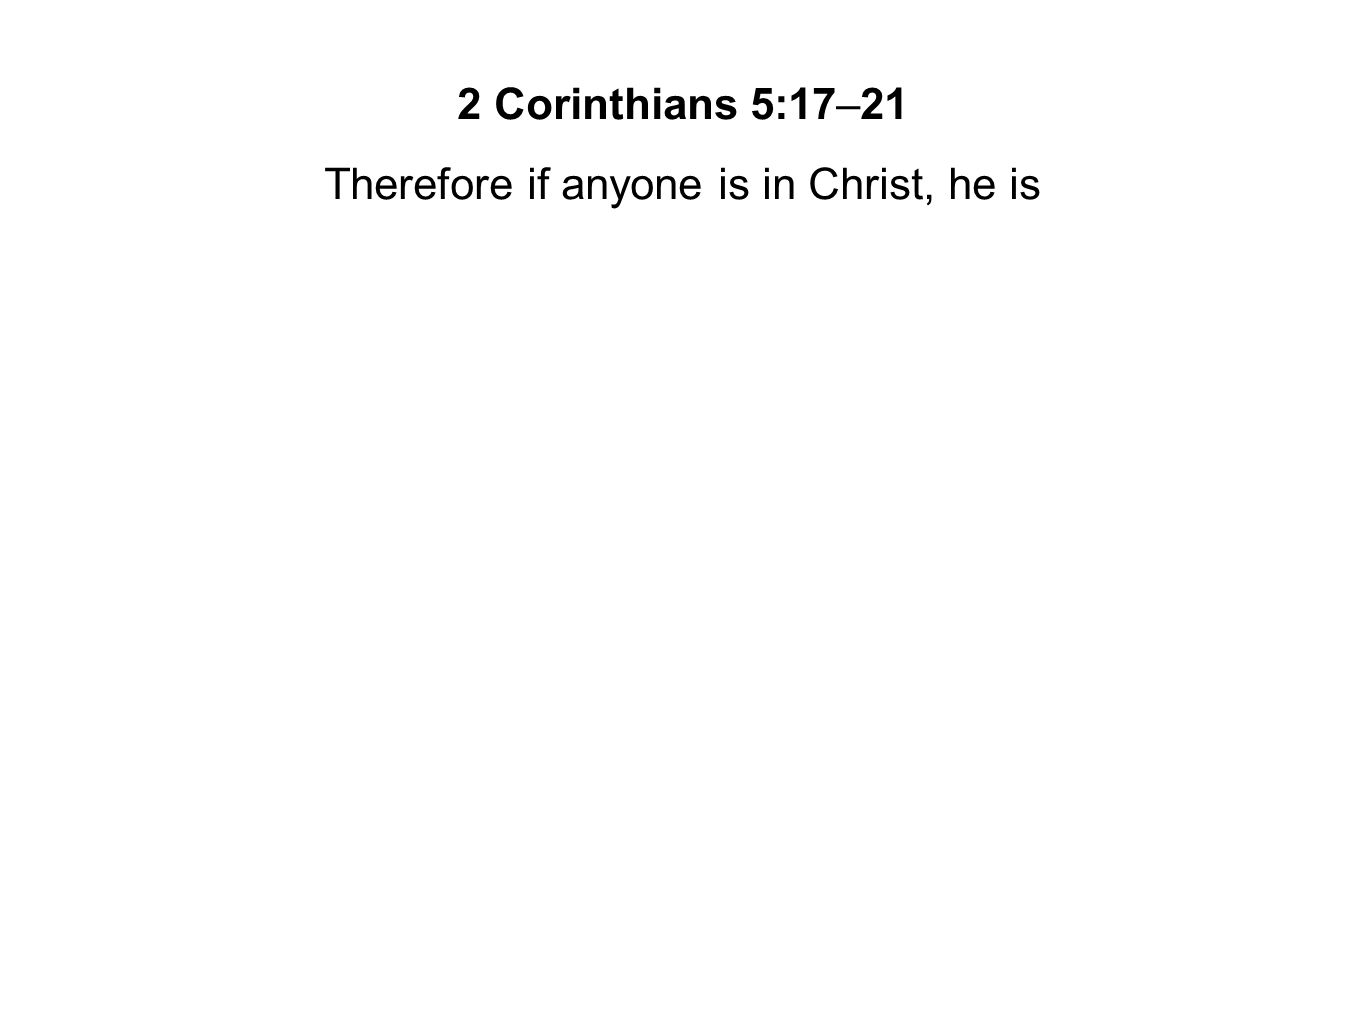 Therefore if anyone is in Christ, he is